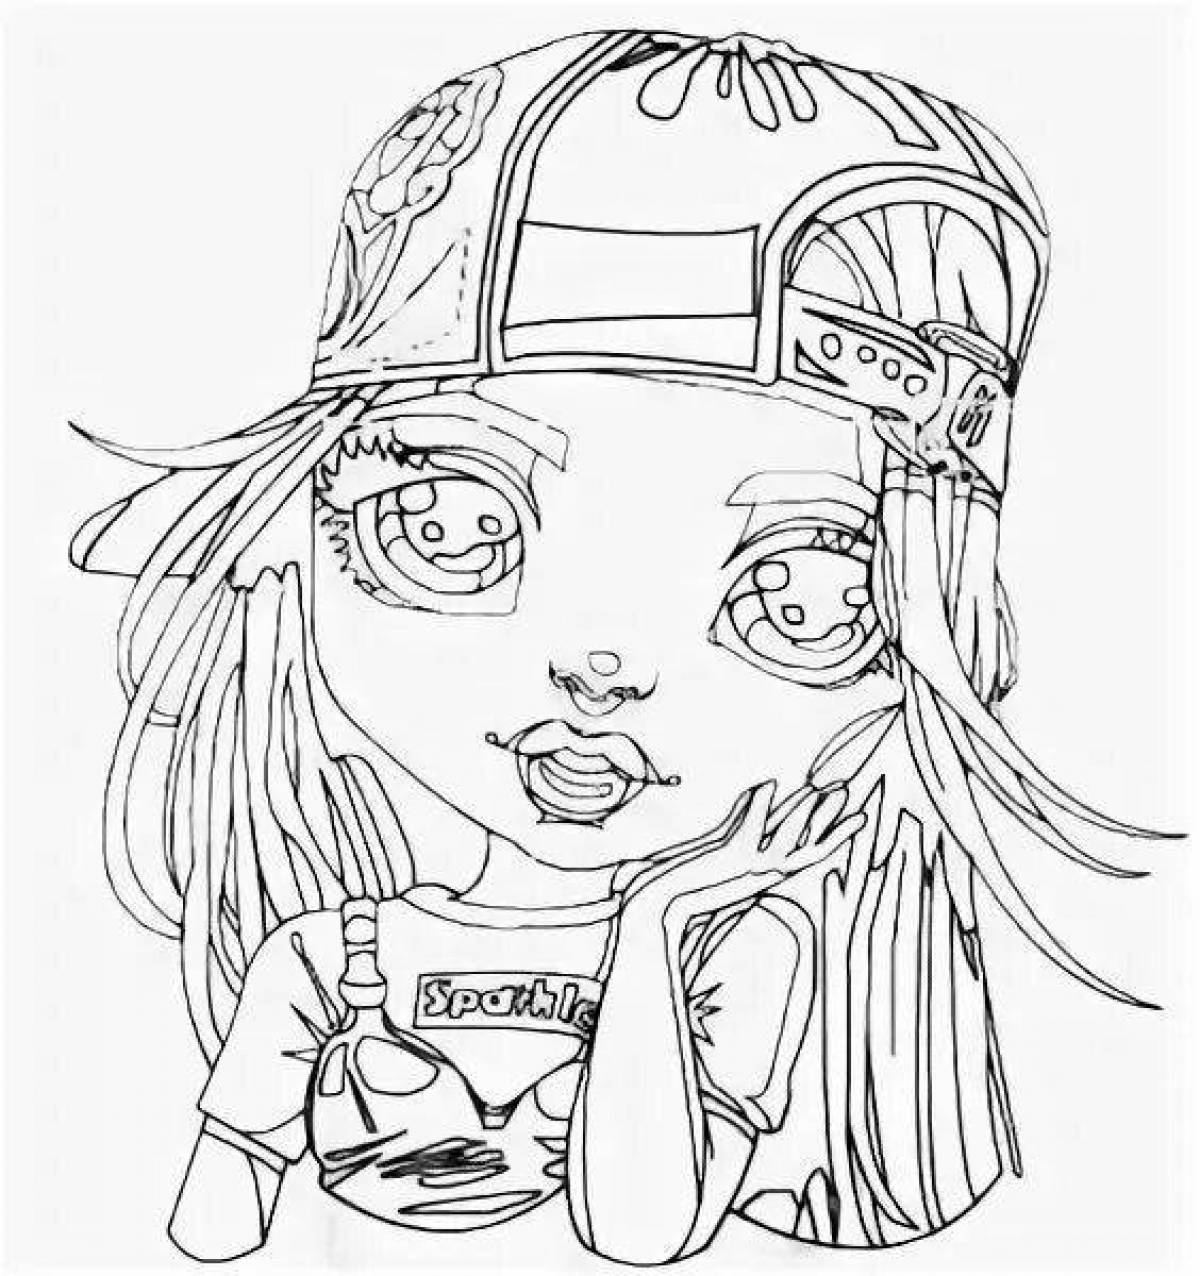 Rainbow high coloring page